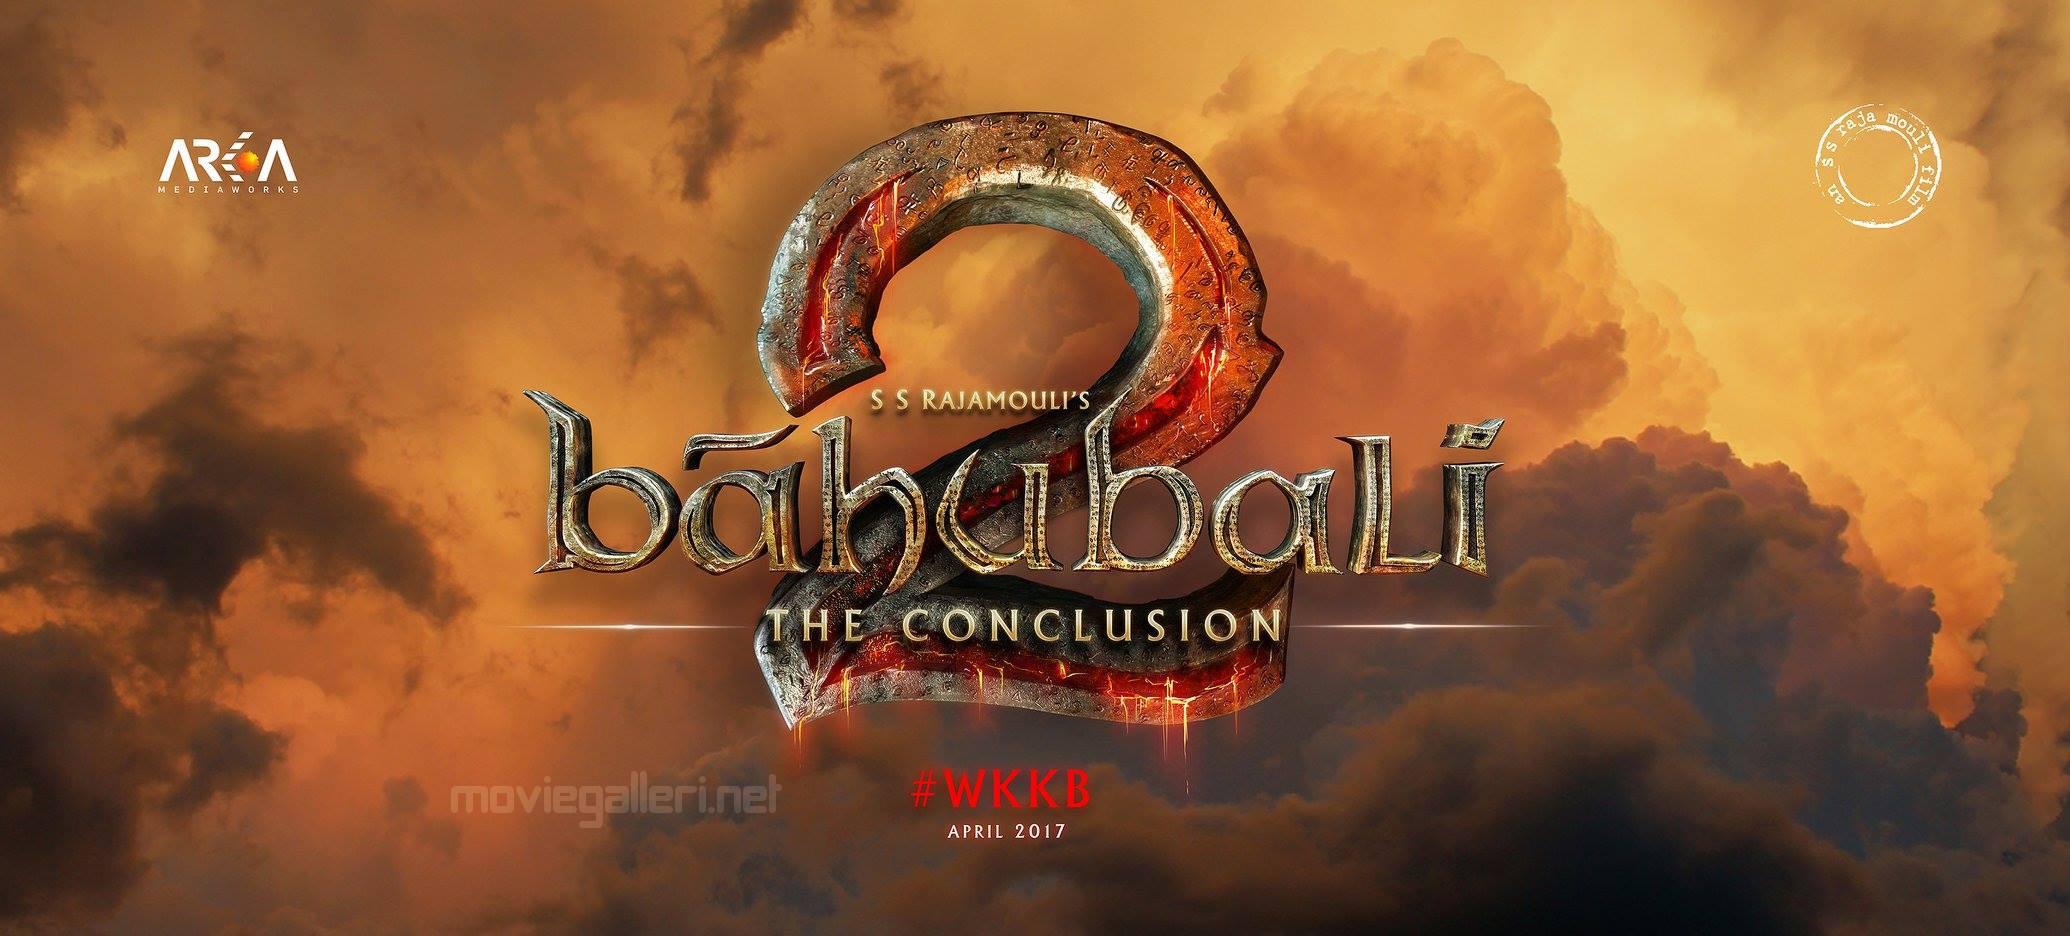 Baahubali 2 The Conclusion Movie Logo Wallpaper | New Movie Posters